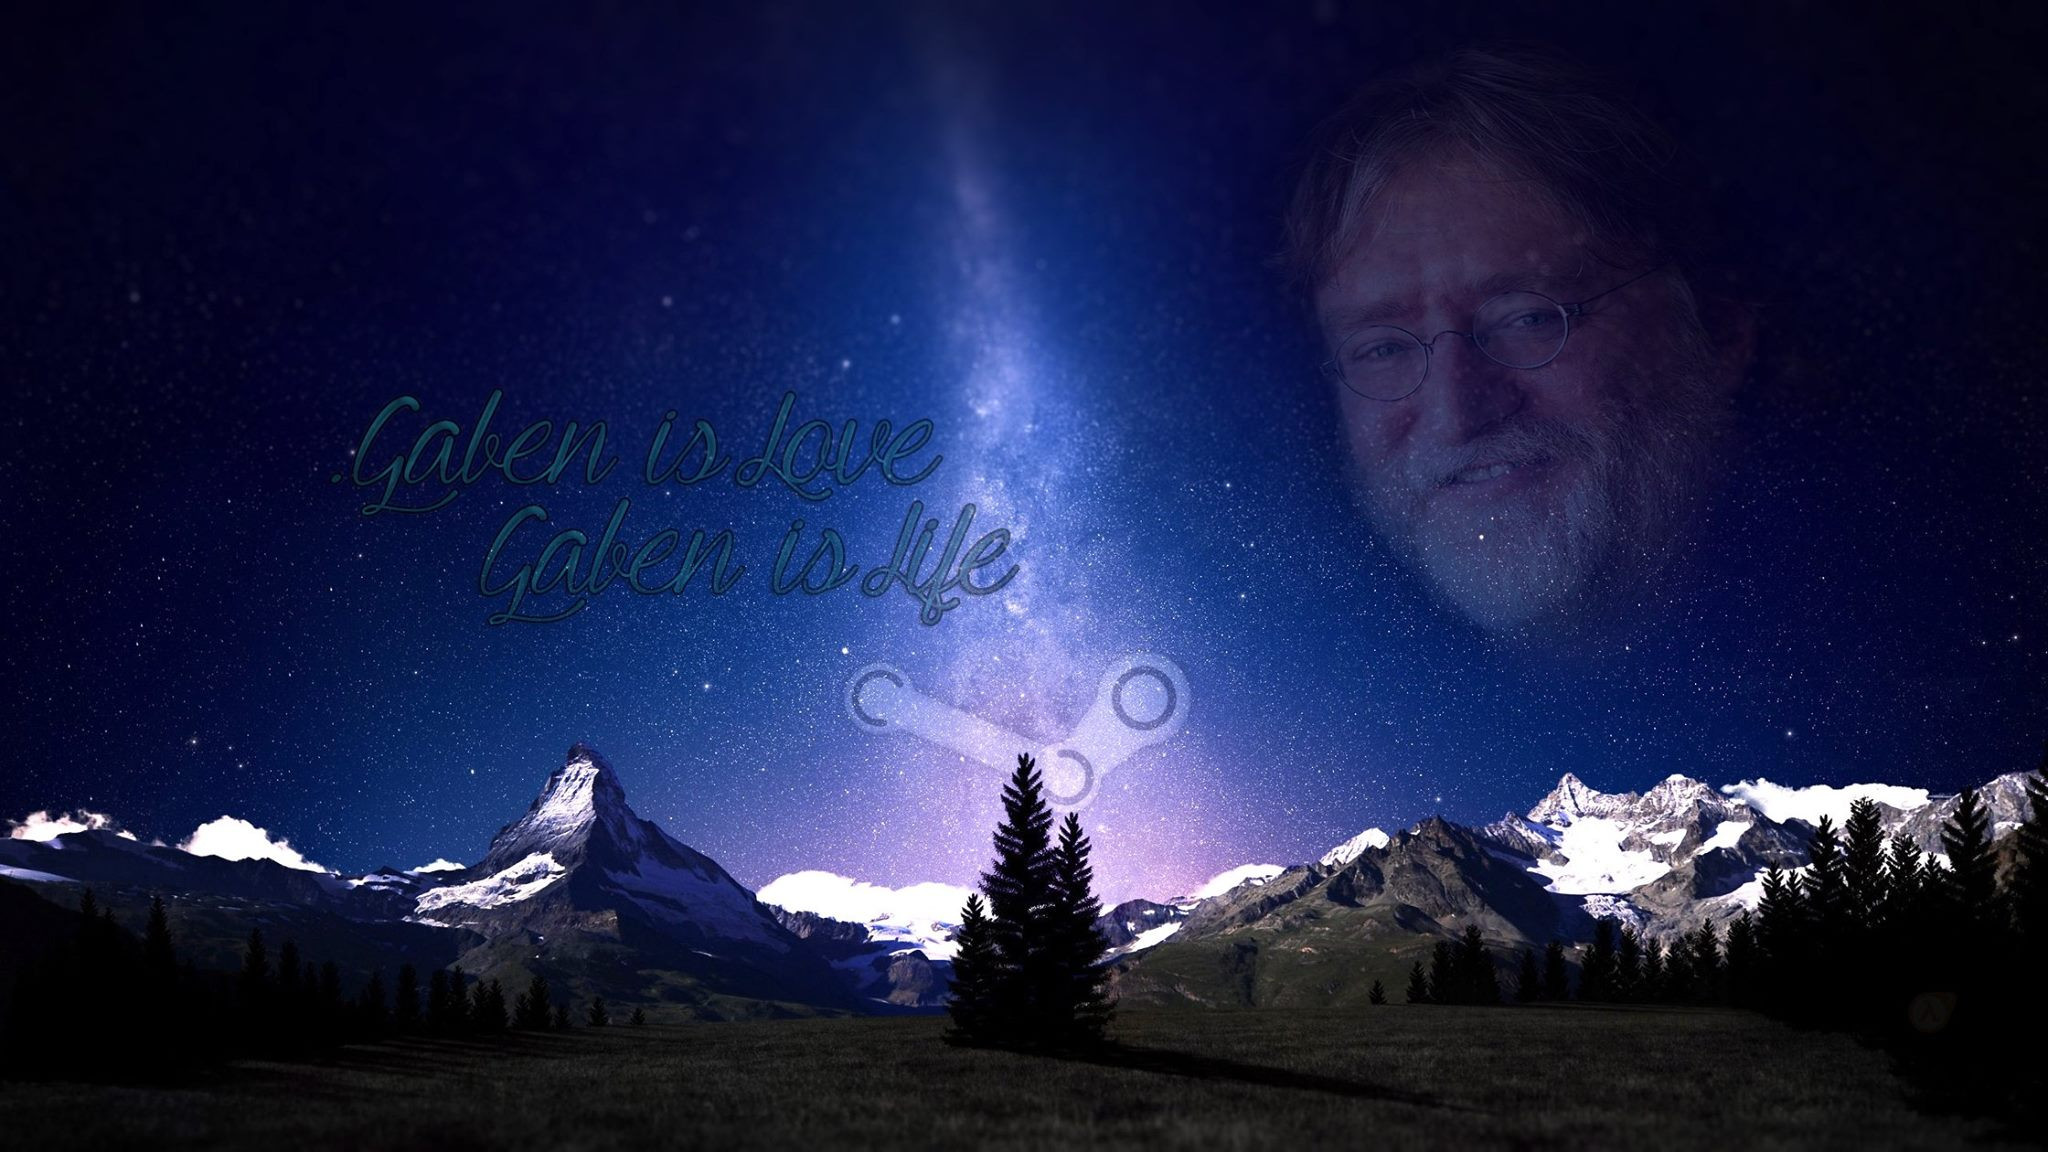 2048x1152 Church of GabeN - Off Topic - Turtle Rock Forums